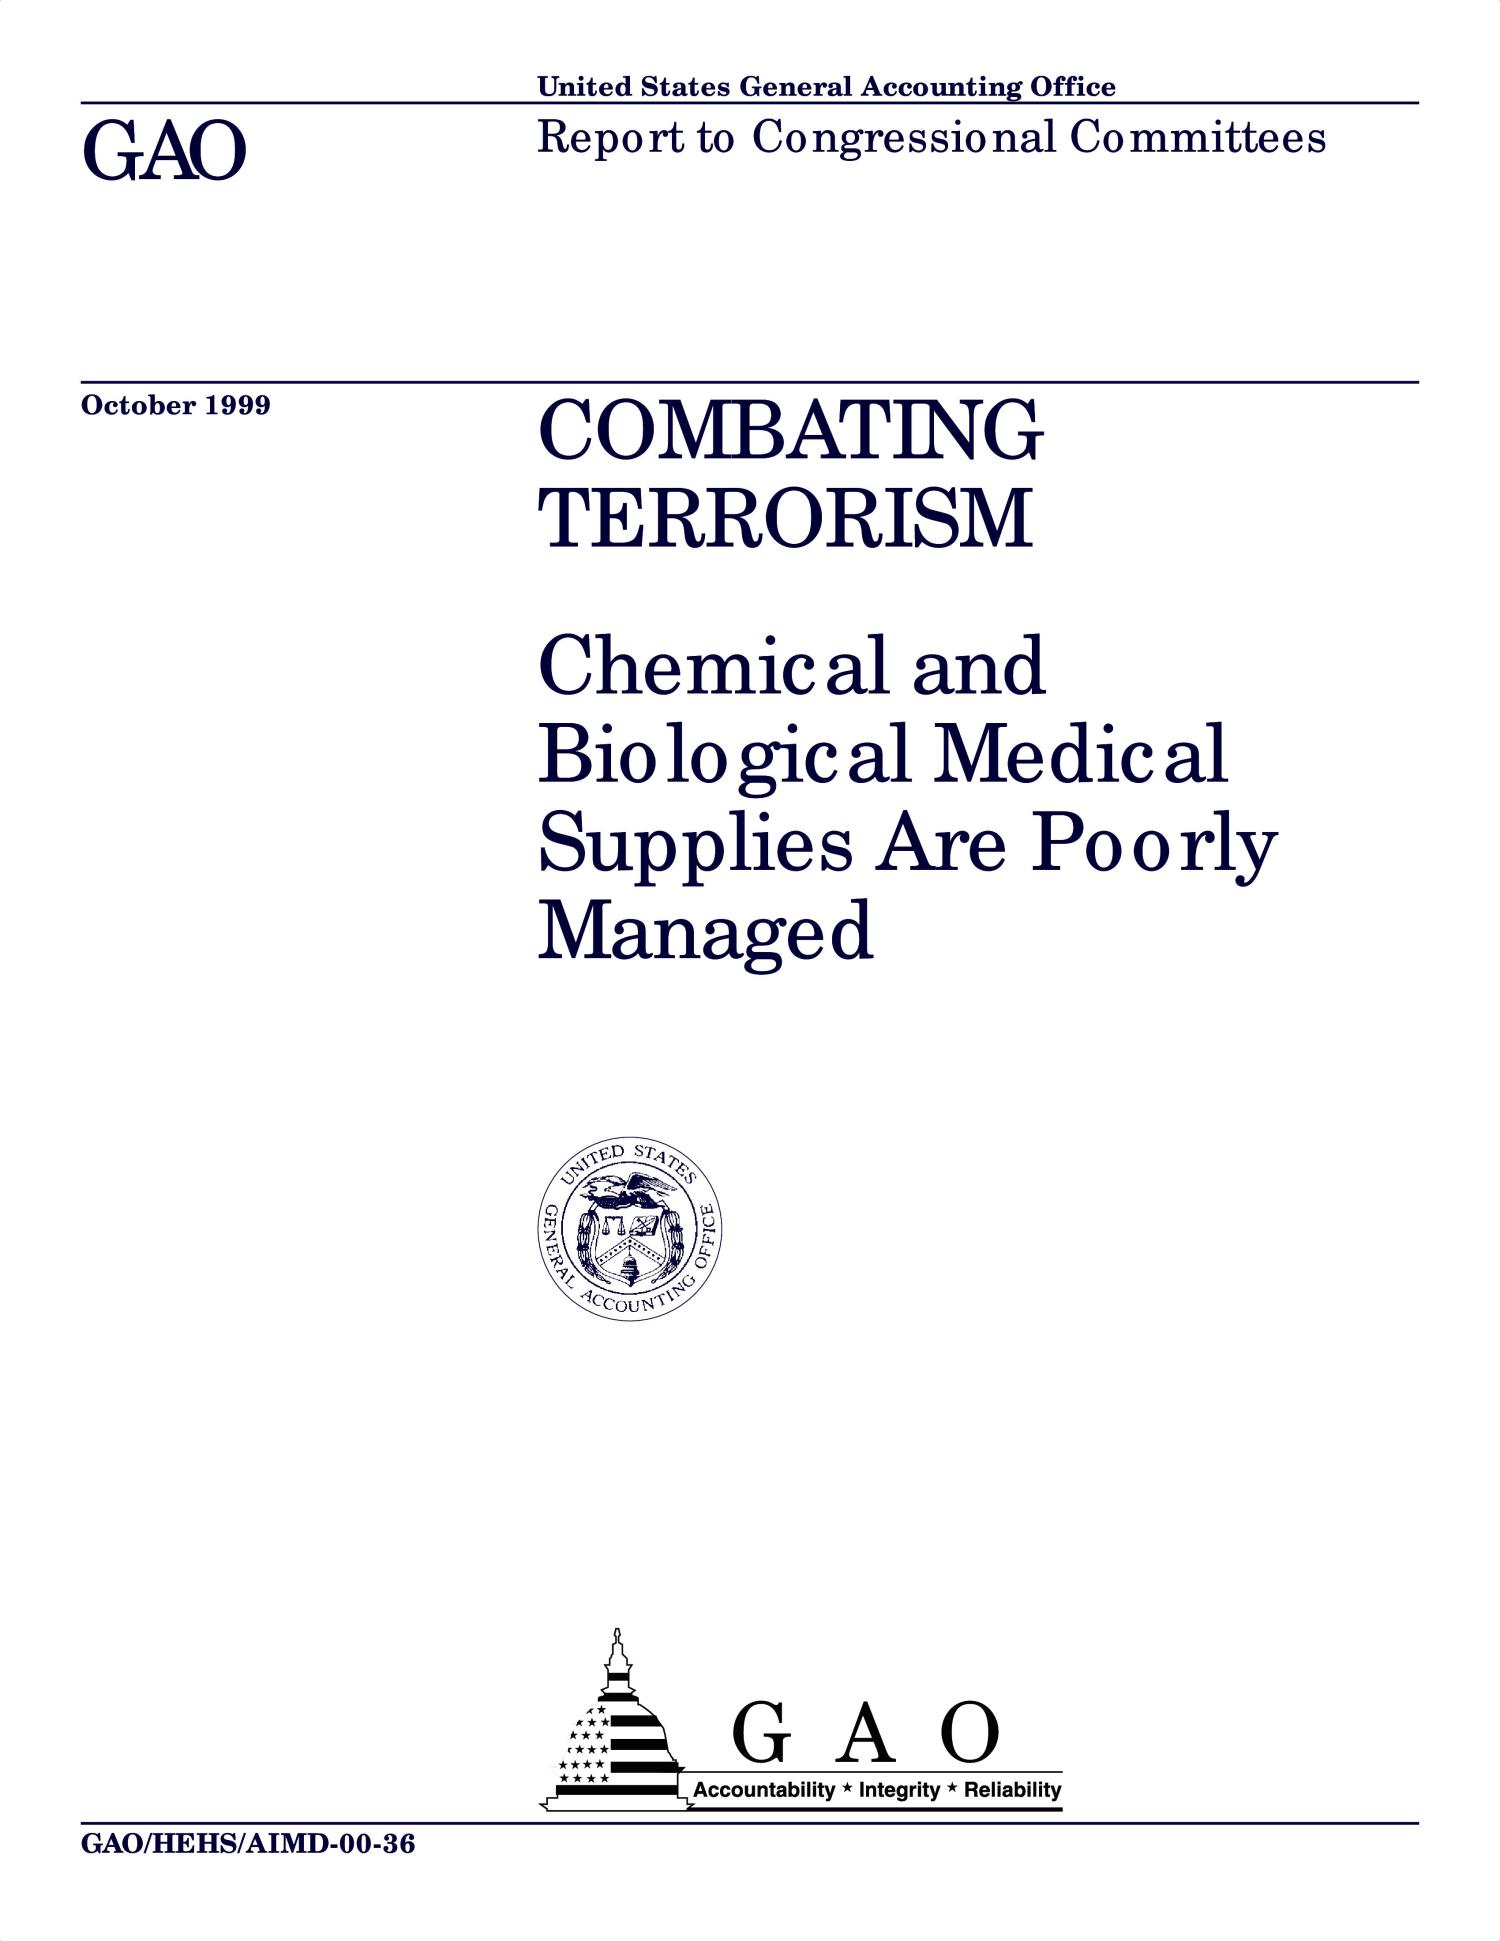 Combating Terrorism: Chemical and Biological Medical Supplies Are Poorly Managed
                                                
                                                    [Sequence #]: 1 of 30
                                                